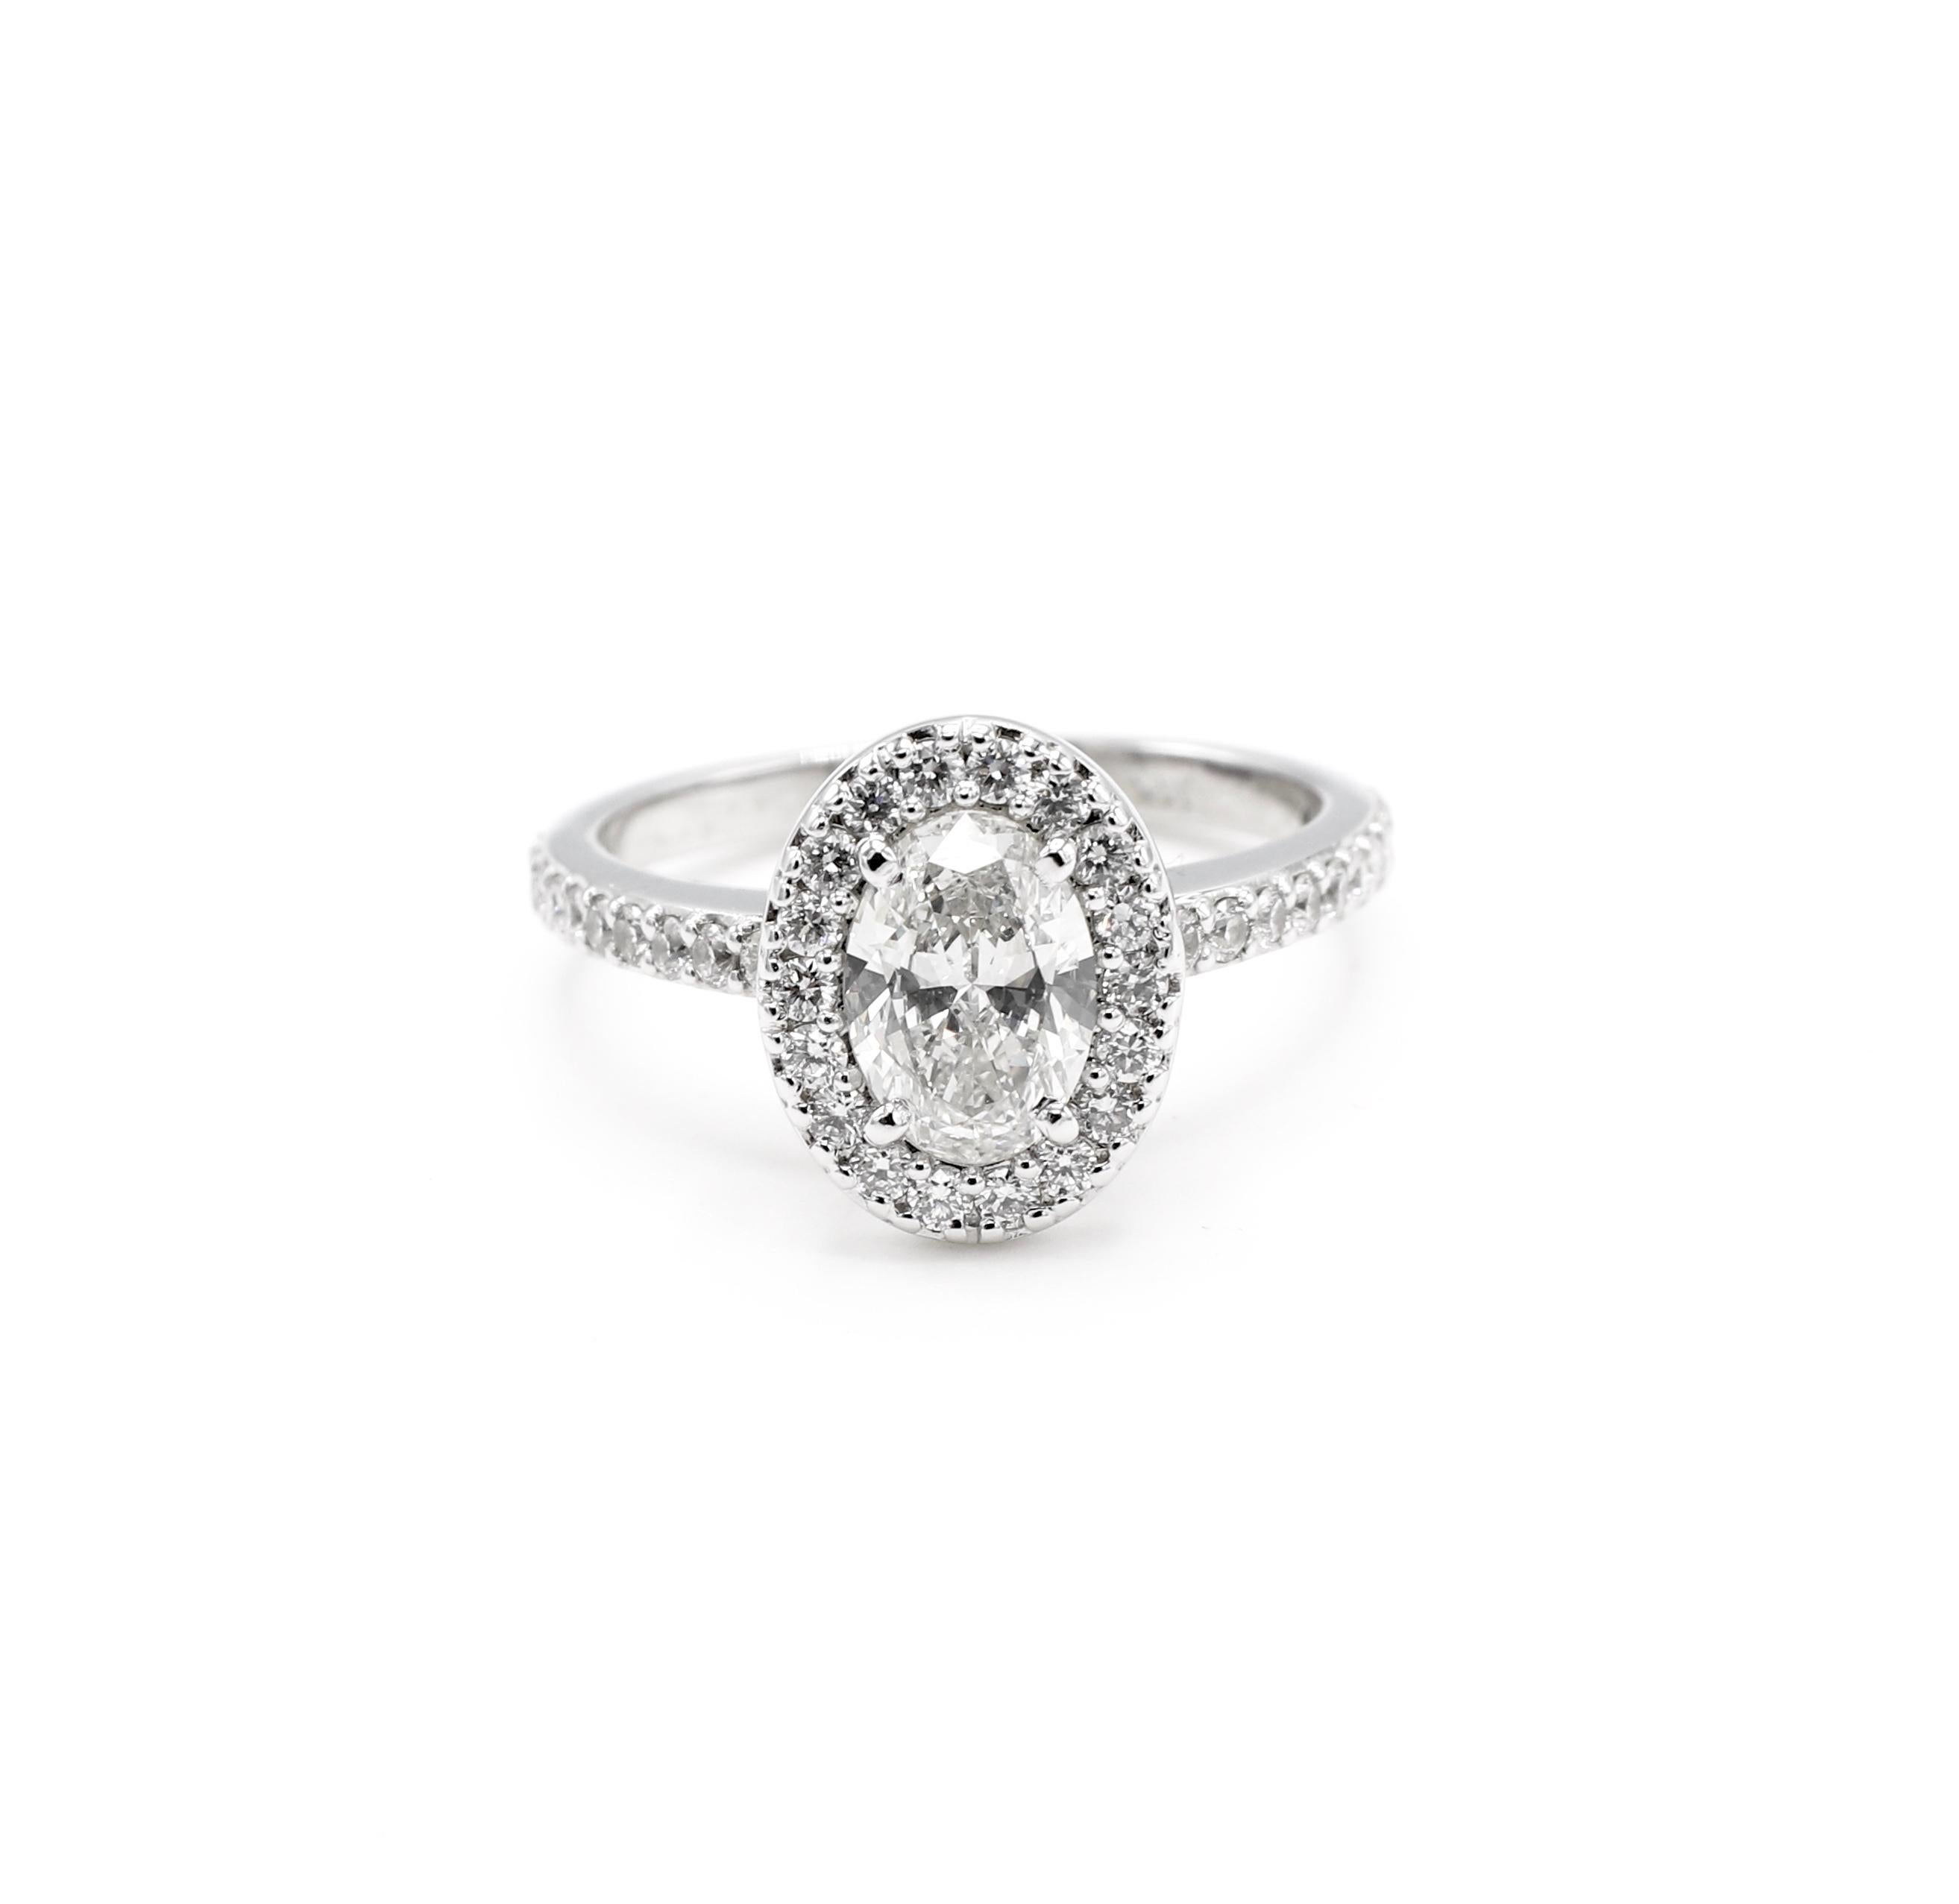 GIA Certified 0.73 Carat Oval Diamond Halo Engagement Ring 14K White Gold 

GIA report number: 7222536884 (please note report copy pictured for details)
Diamond shape: Oval
Carat weight: 0.73 carat
Color grade: H
Clarity grade: SI1 
Polish: Very